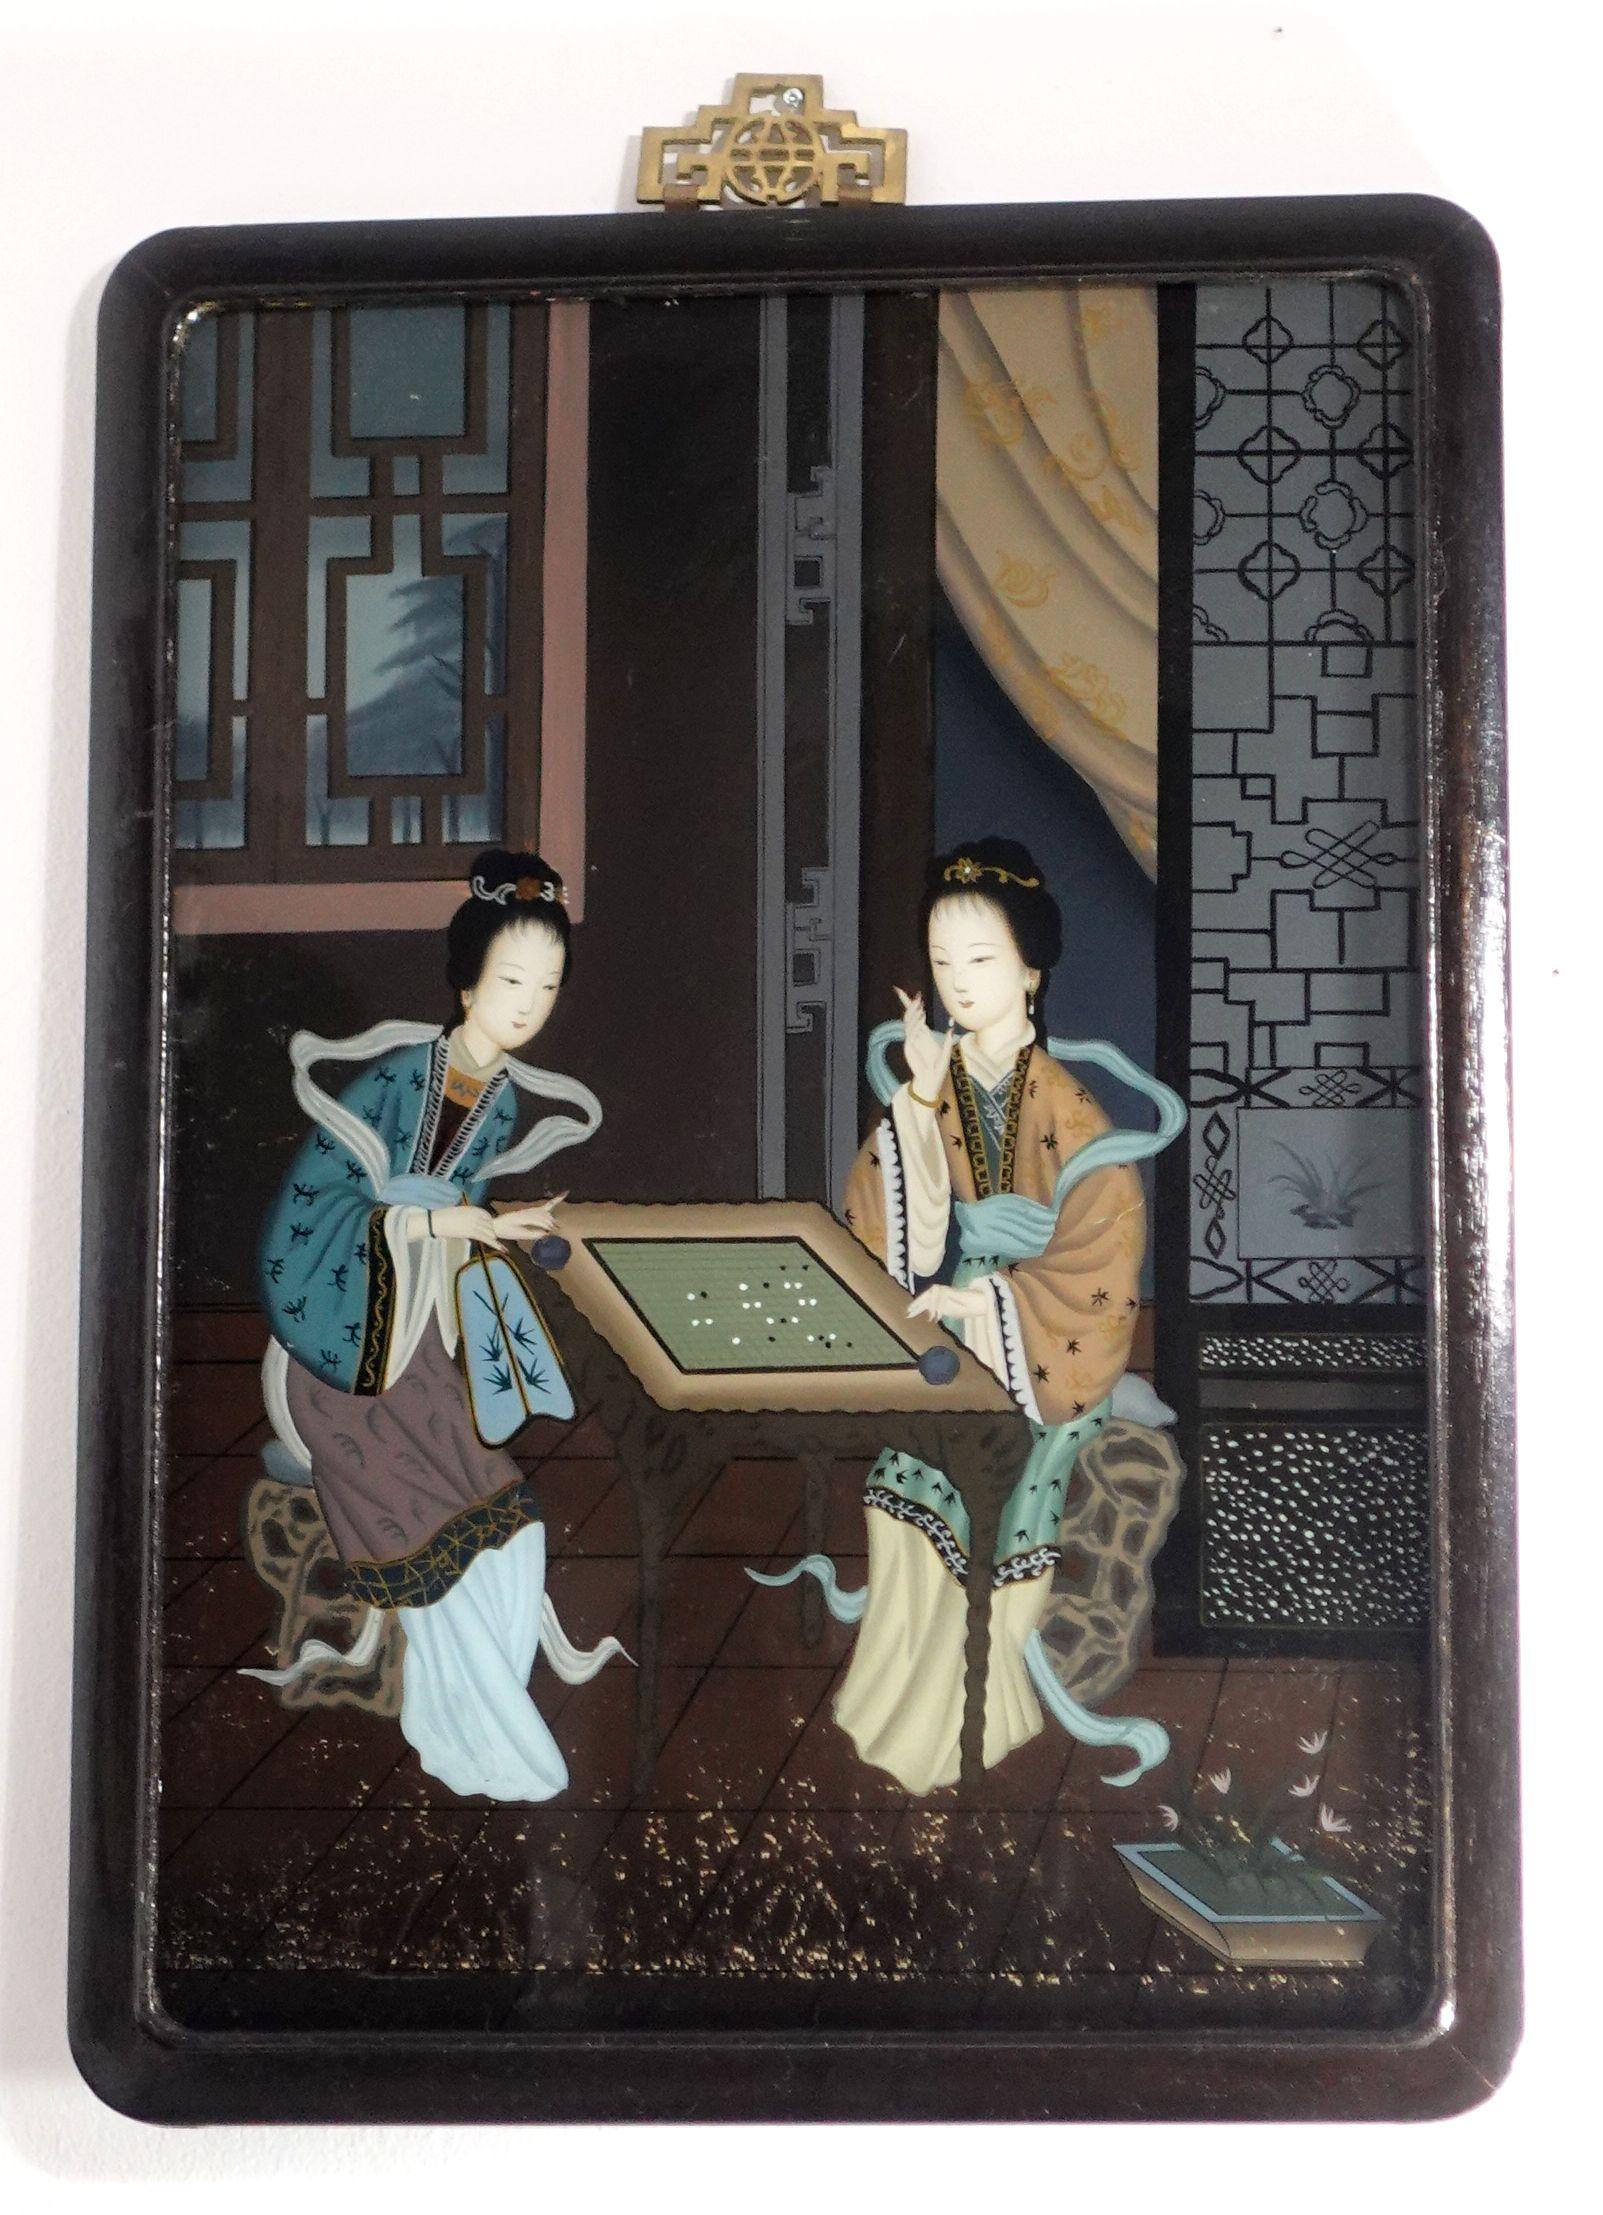 A charming late 19th-century to early 20th-century, Chinese export reverse glass painting, depicting two noblewomen within an interior setting playing Chinese chess. The painting comes with its original hardwood frame and the old pins in the back of